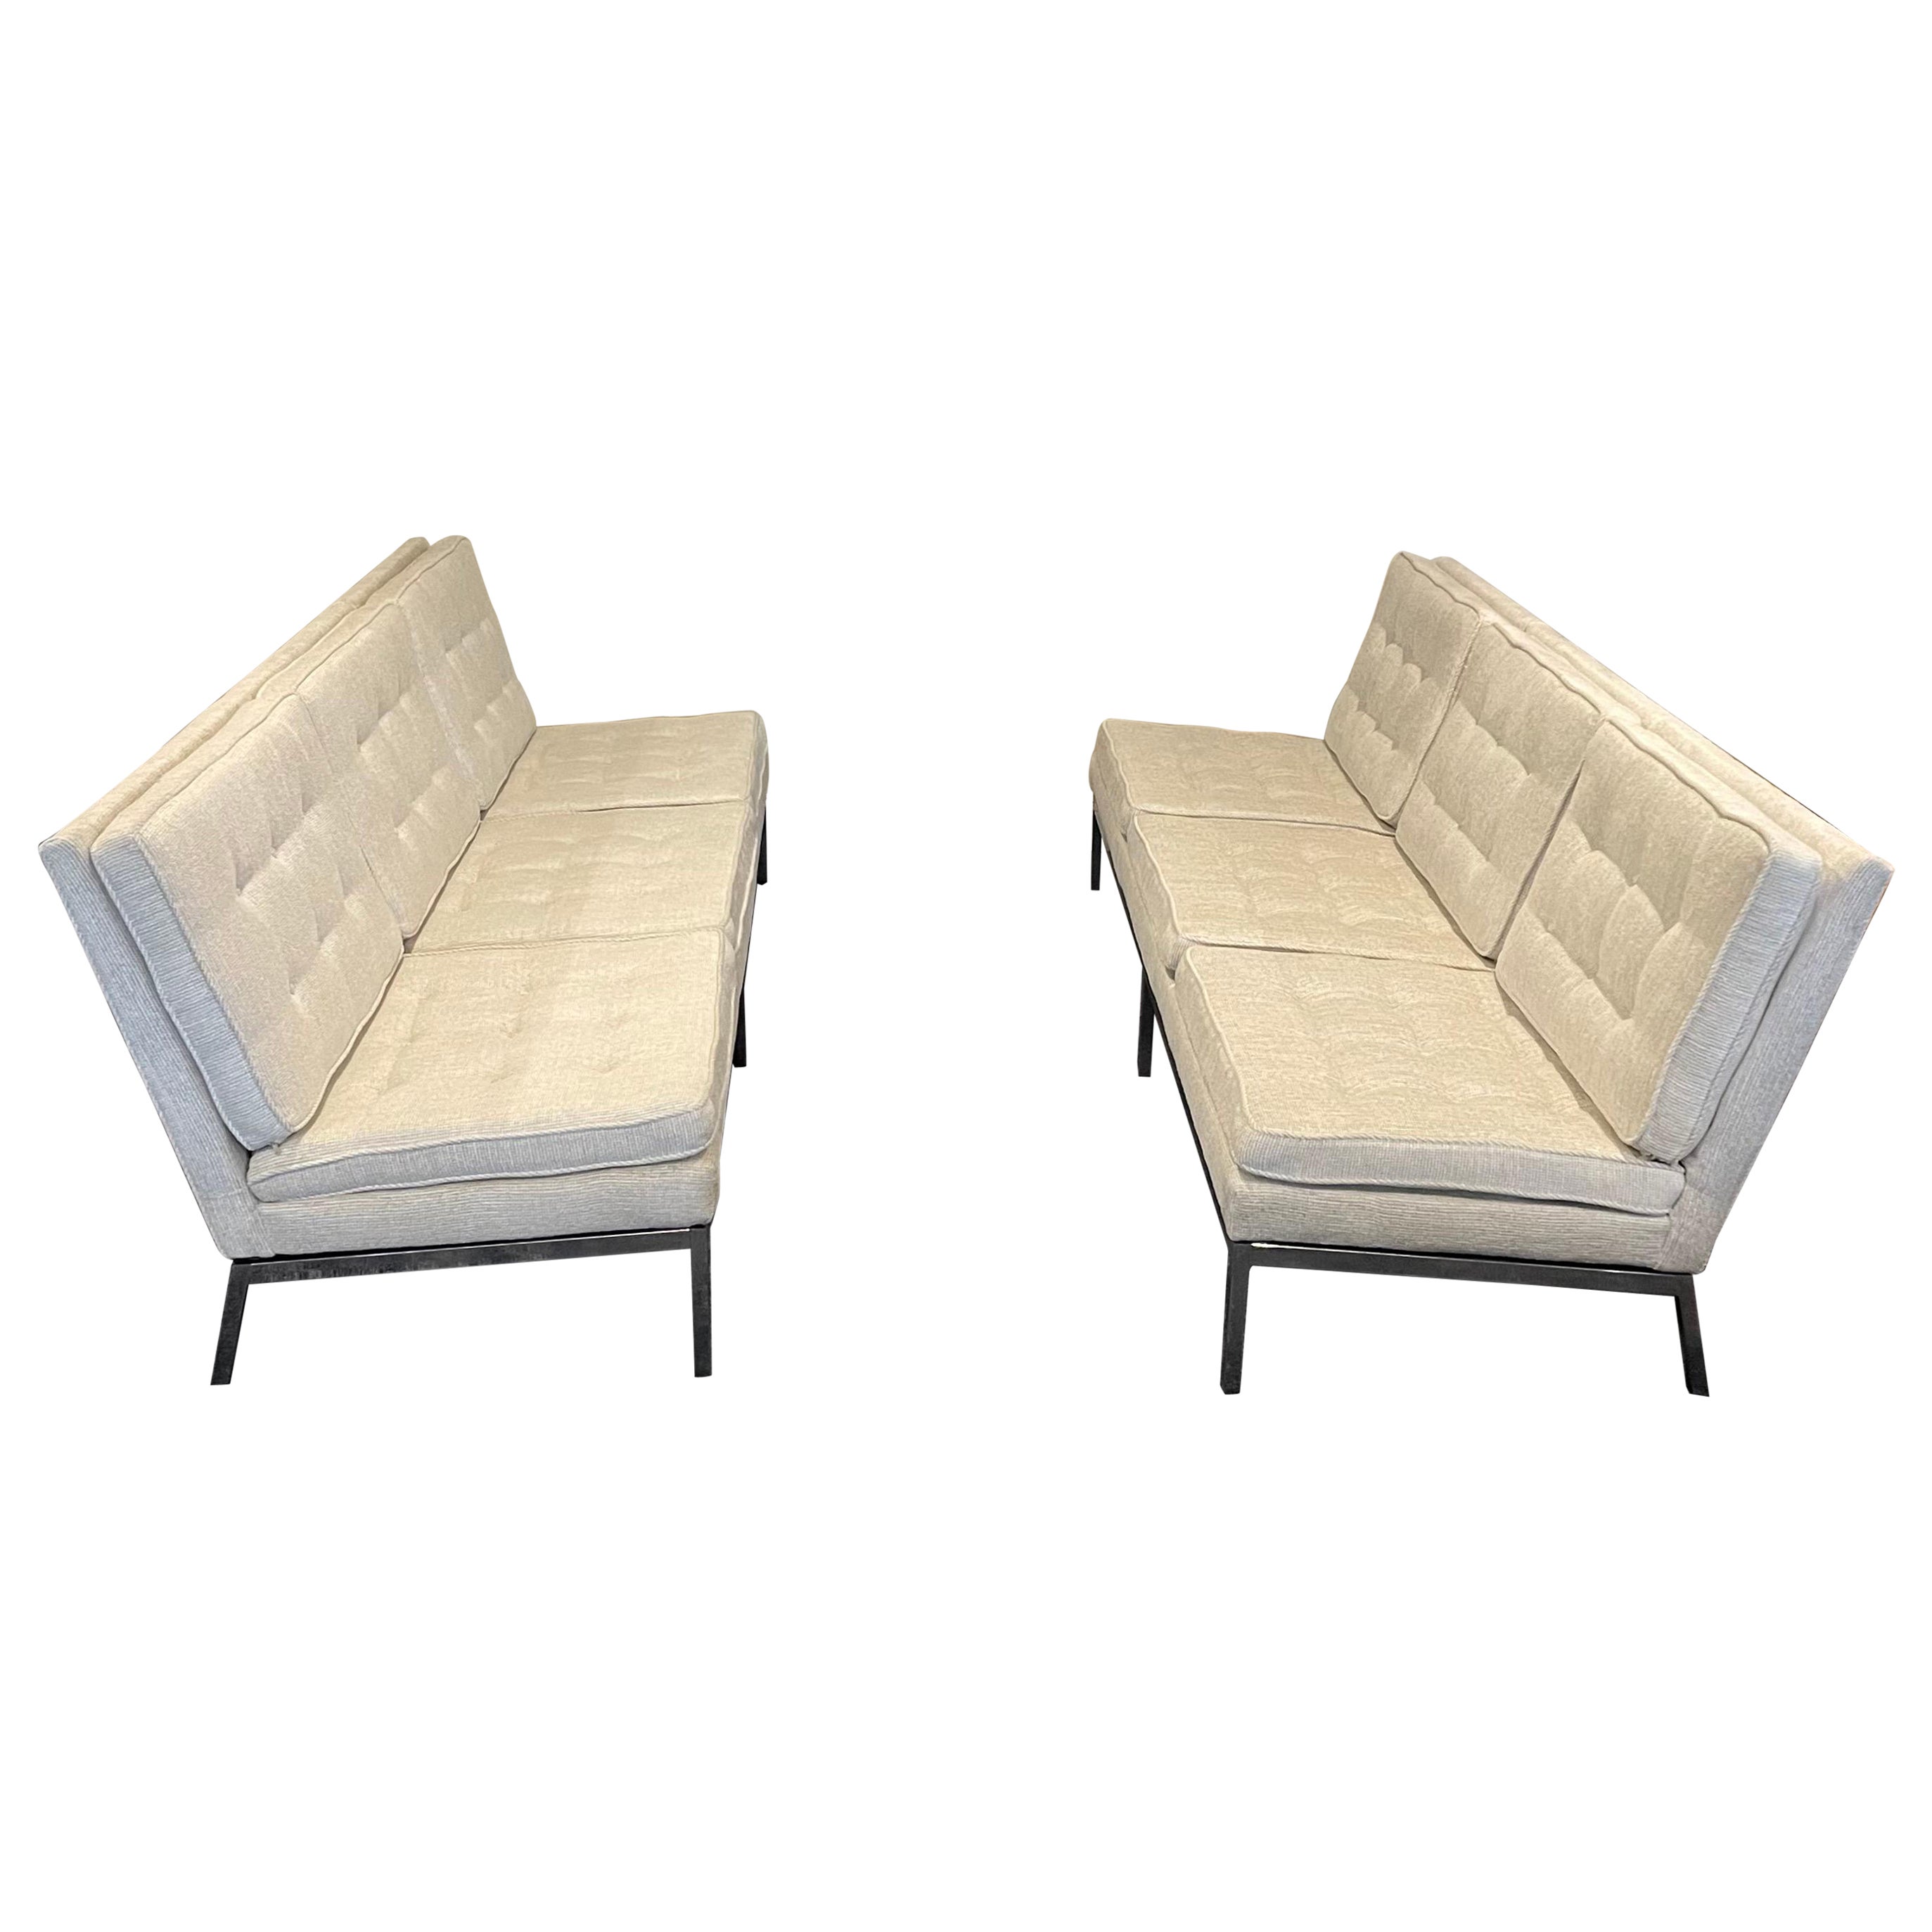 1960s Mid-Century Modern Florence Knoll Slipper Sofas- a Pair For Sale